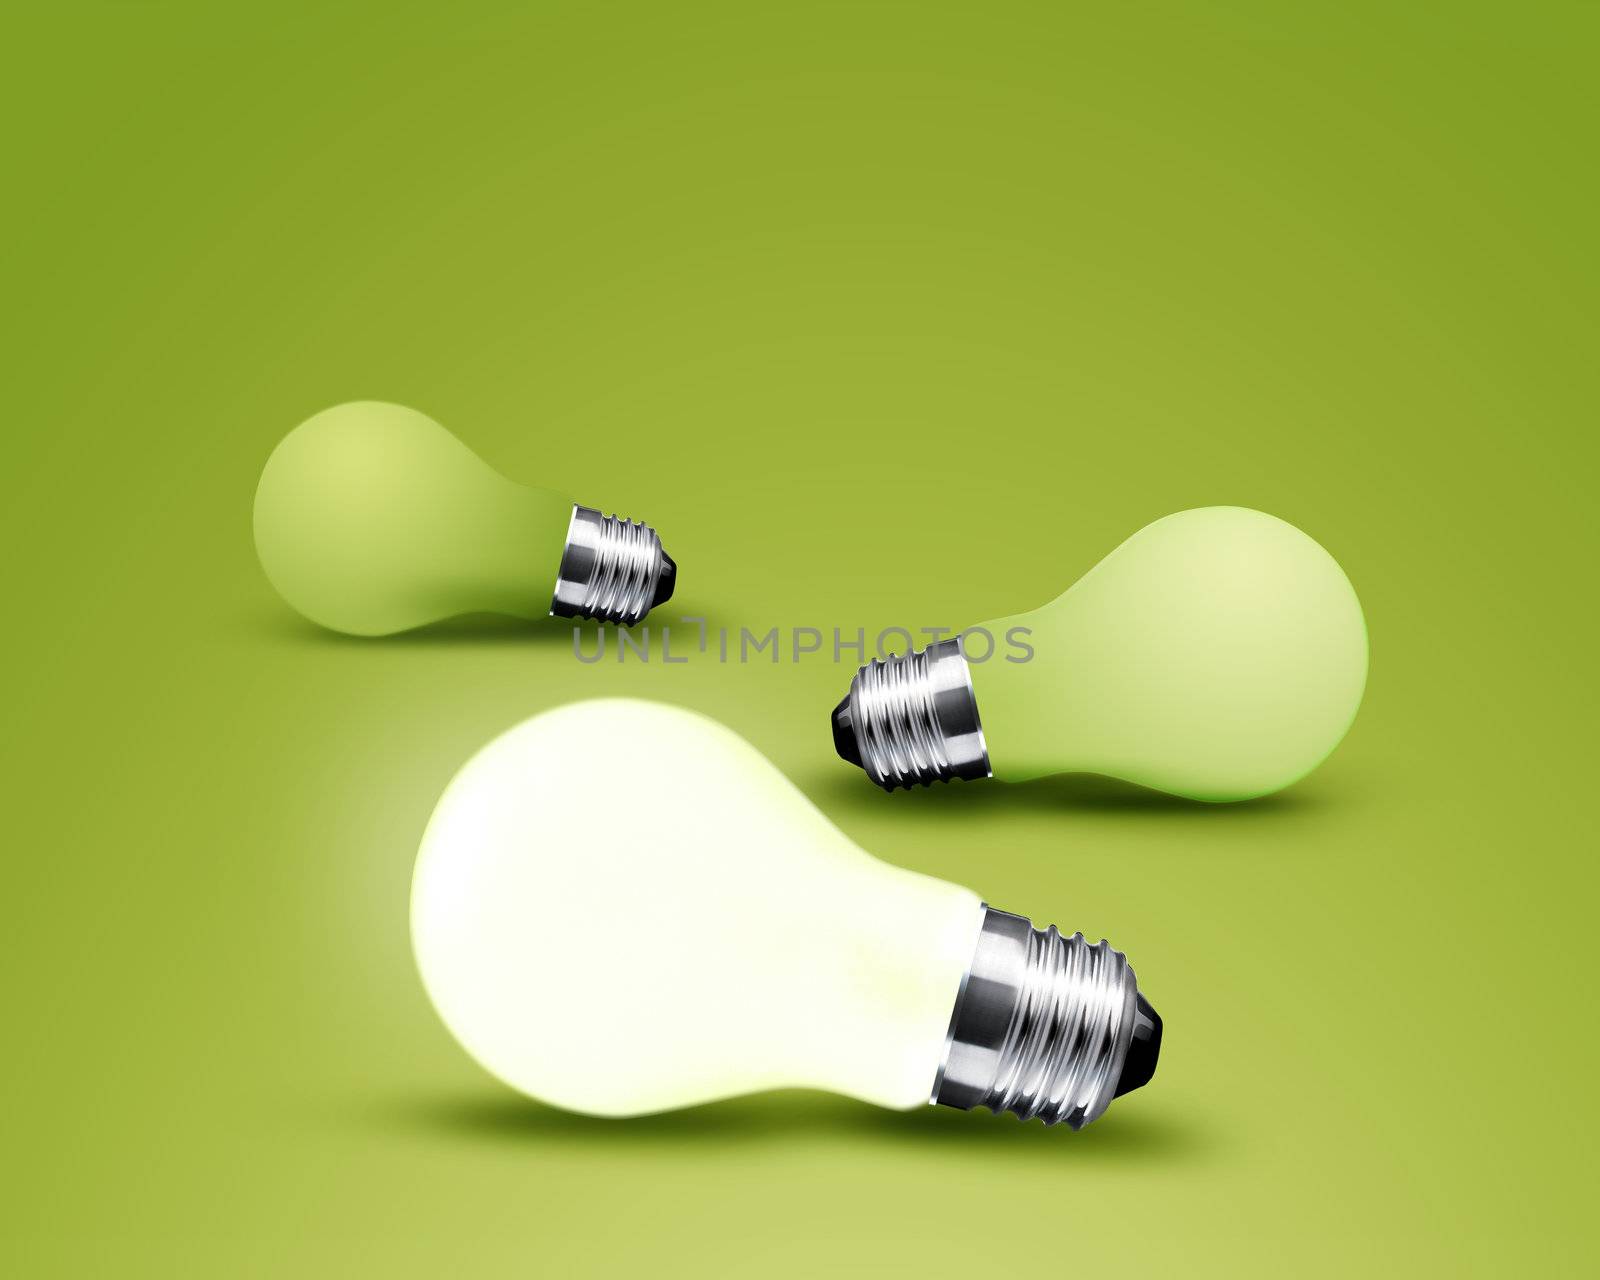 one glowing Light bulb by designsstock